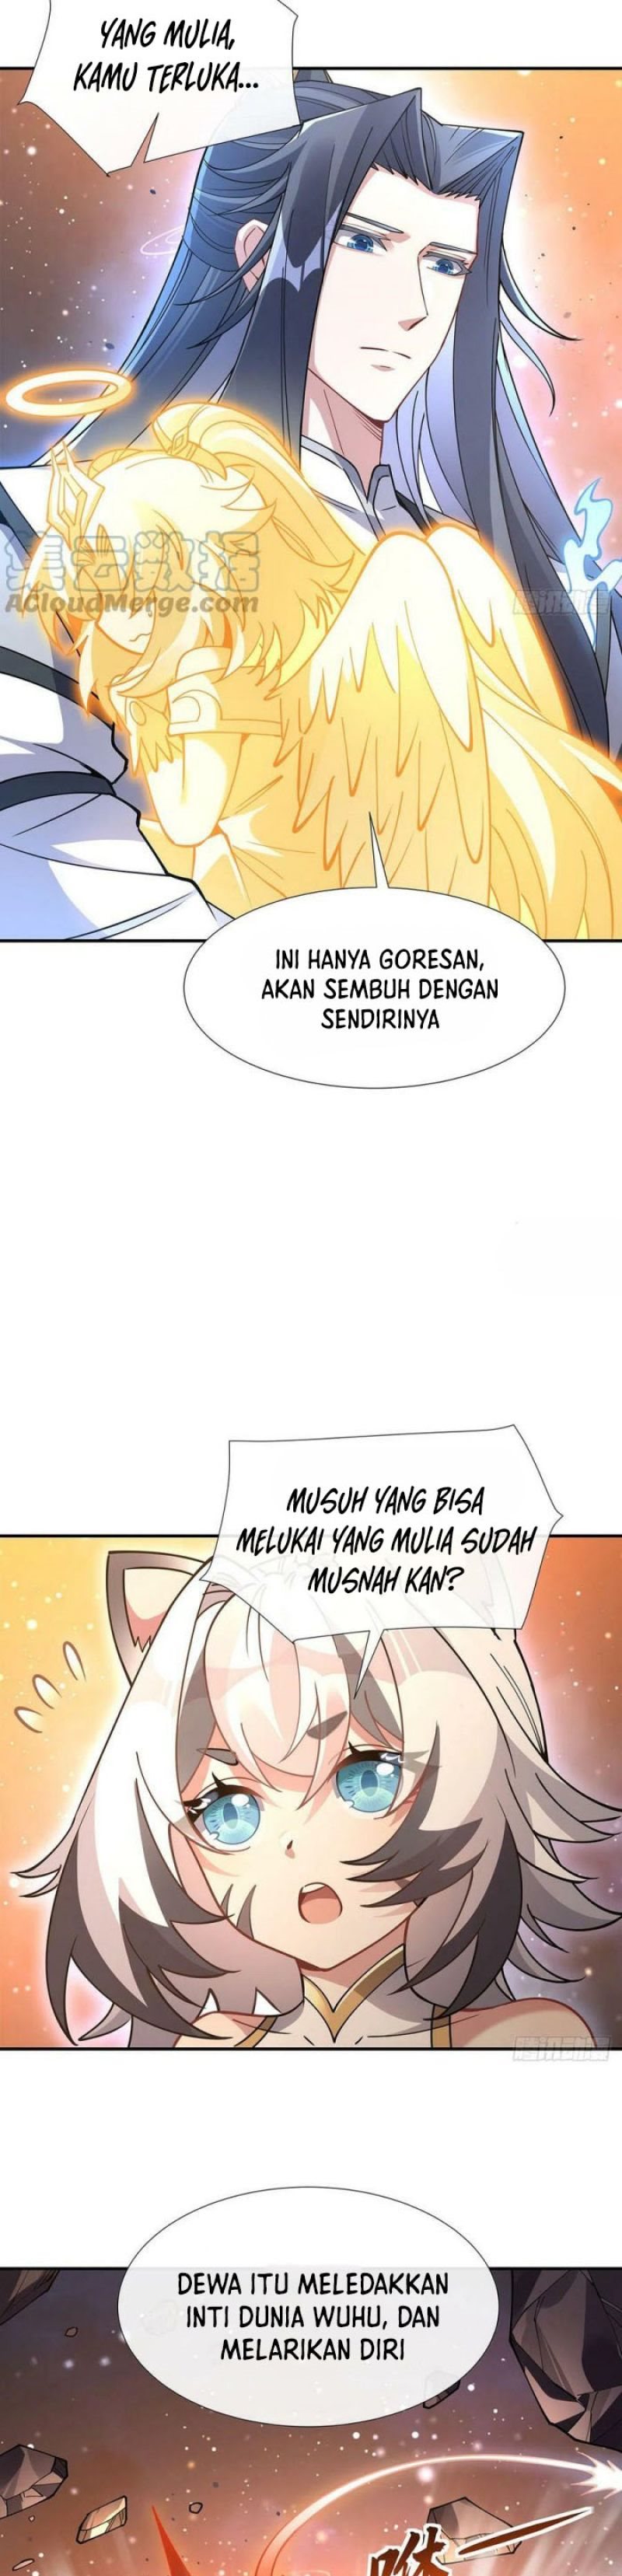 Dilarang COPAS - situs resmi www.mangacanblog.com - Komik my female apprentices are all big shots from the future 141 - chapter 141 142 Indonesia my female apprentices are all big shots from the future 141 - chapter 141 Terbaru 15|Baca Manga Komik Indonesia|Mangacan